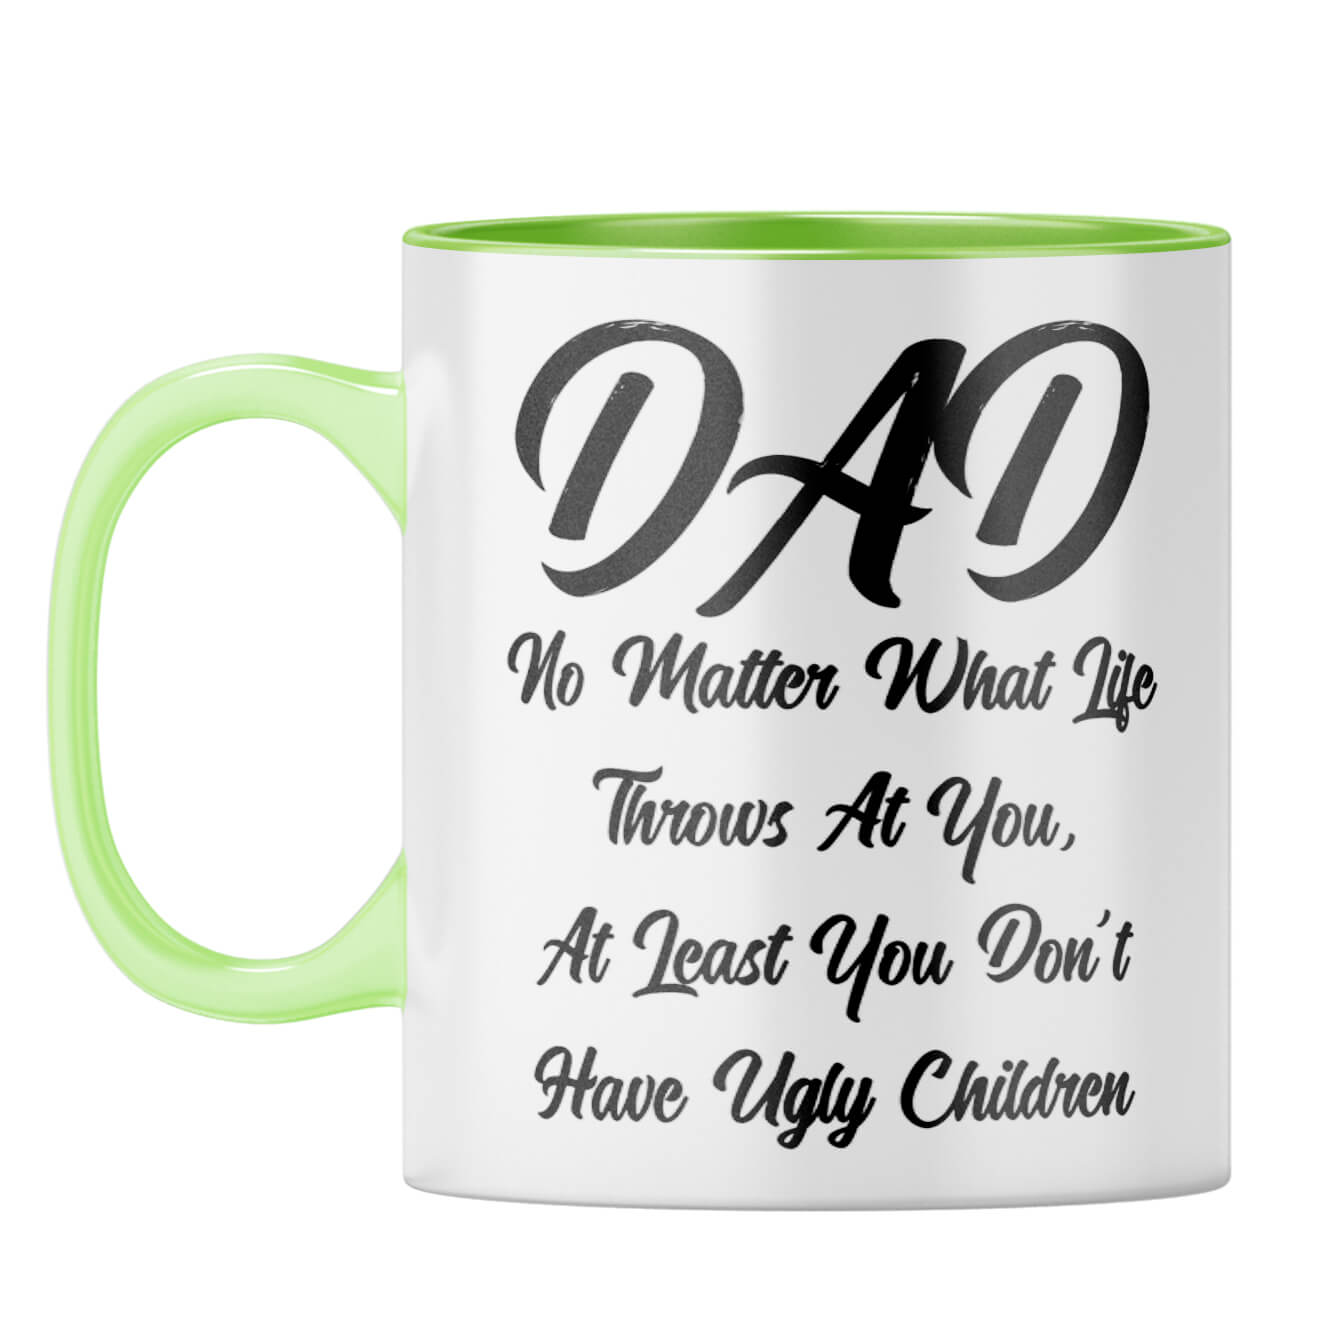 Dad Doesn't Have Ugly Children Coffee Mug Light Green